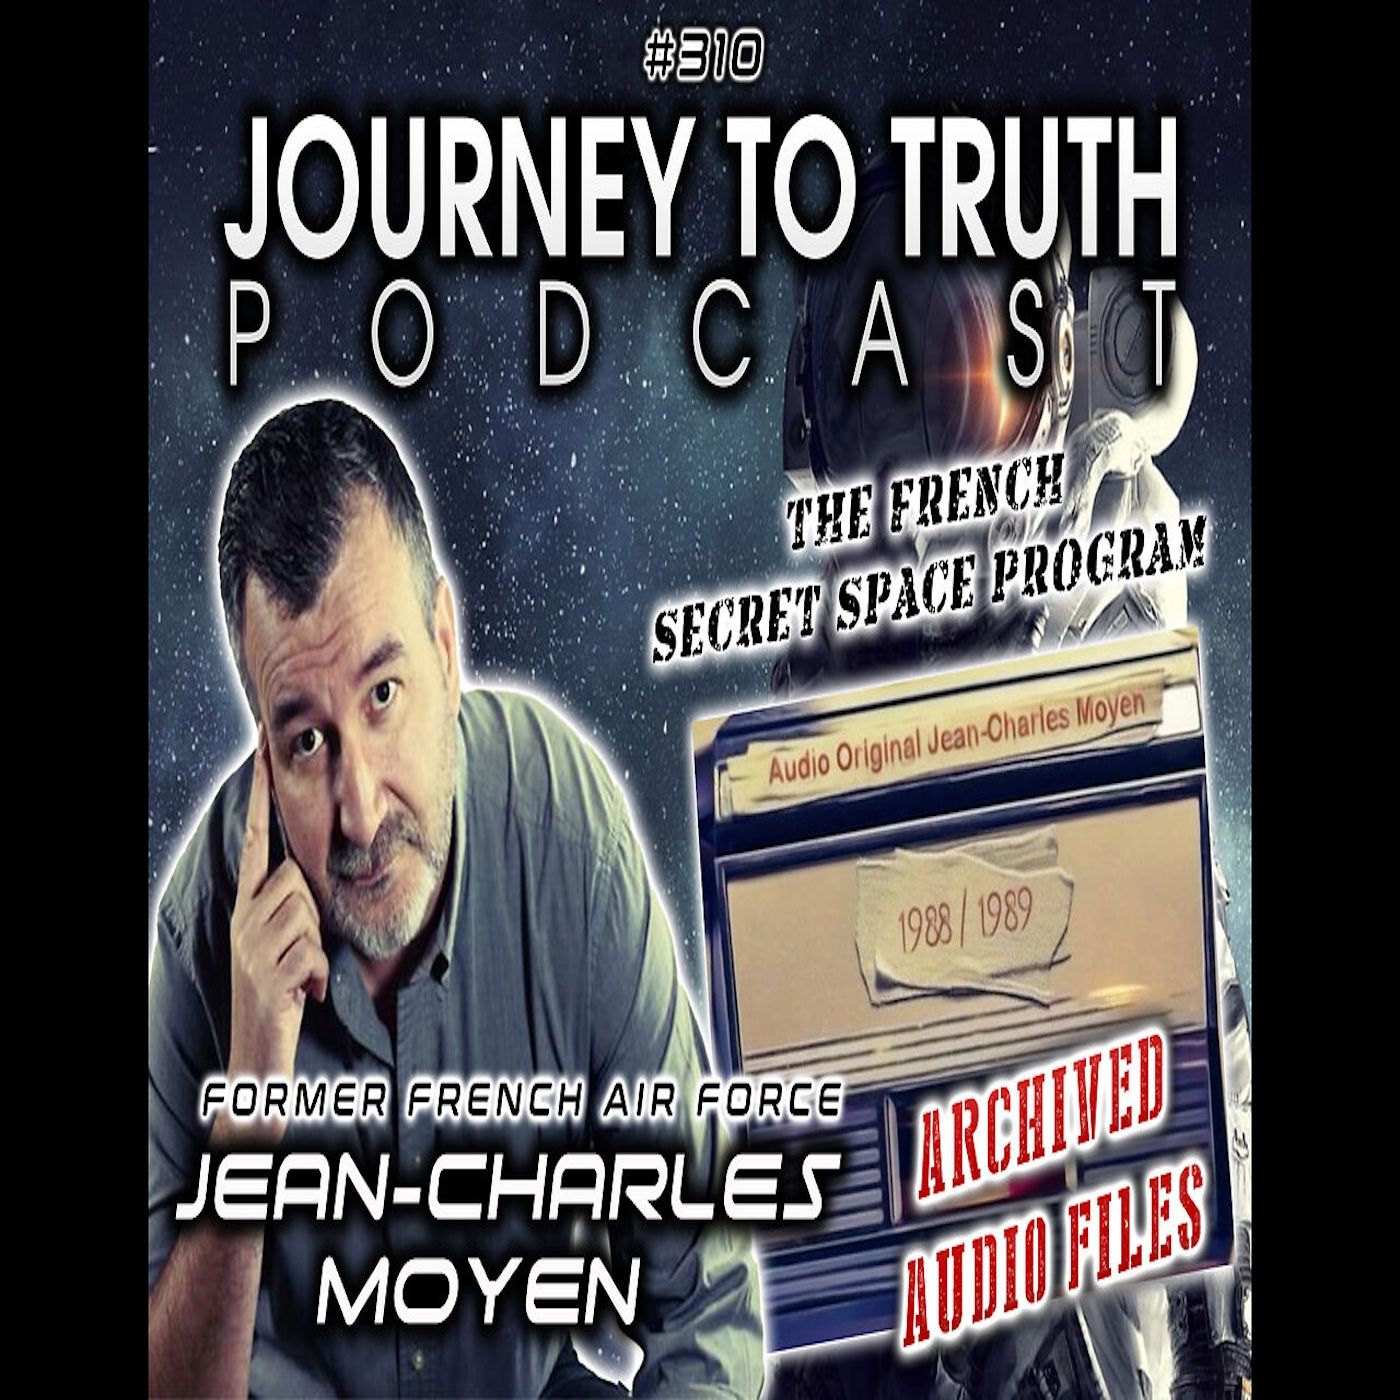 EP 310 | Jean-Charles Moyen | The French Secret Space Program - Archived Audio Files